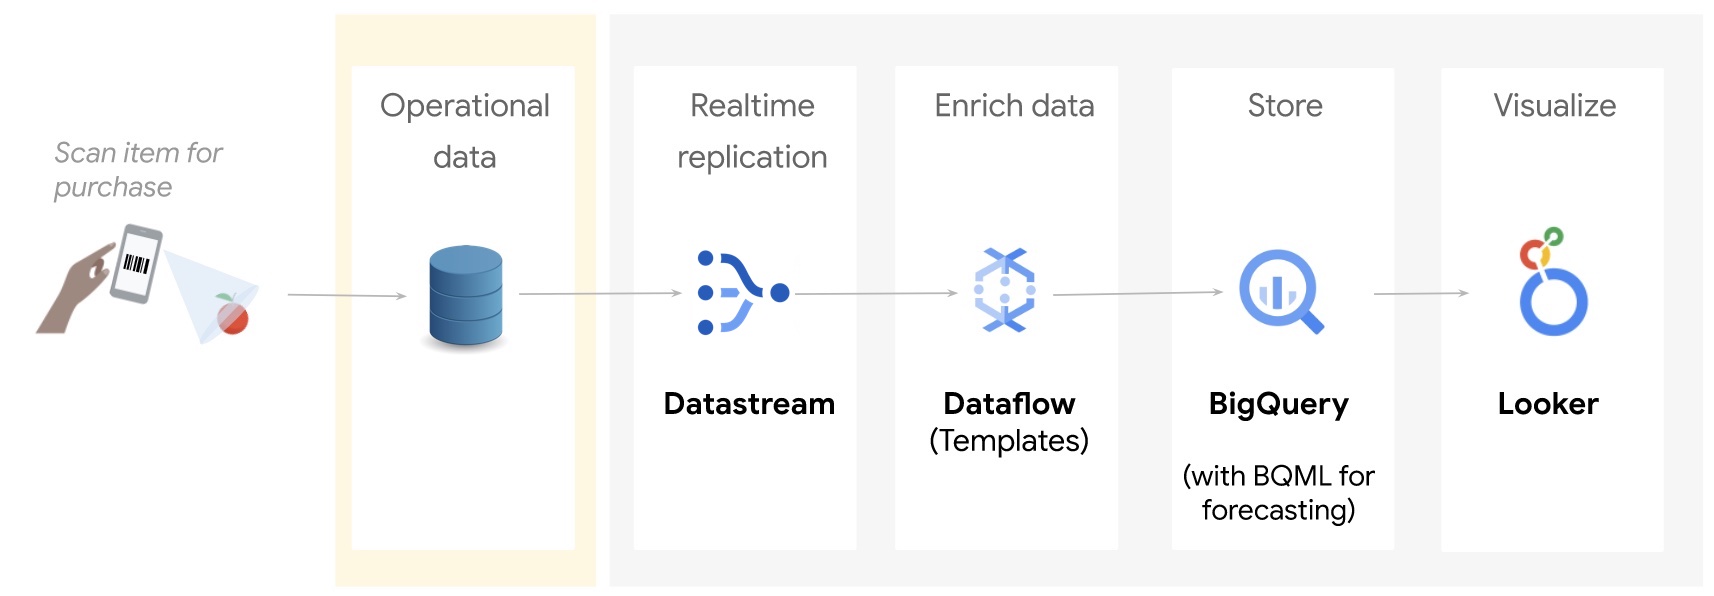 Flow of operational data in FastFresh (explained in following text).